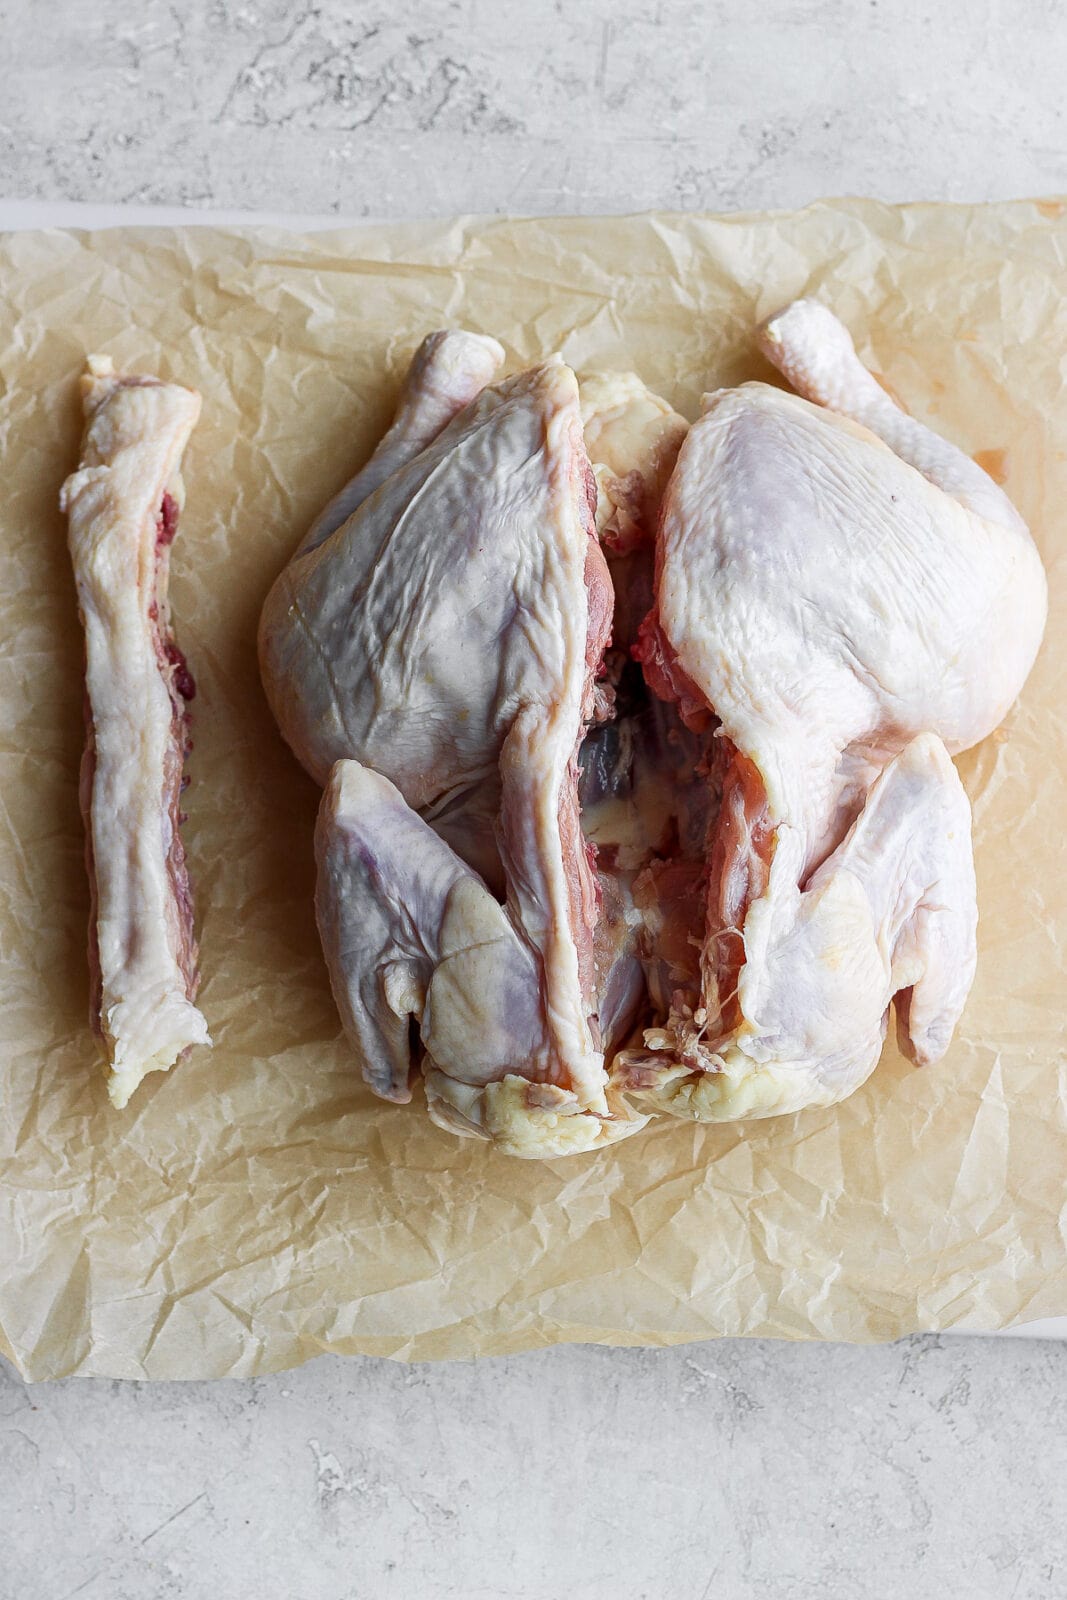 The backbone cut out of the chicken and sitting next to the chicken.